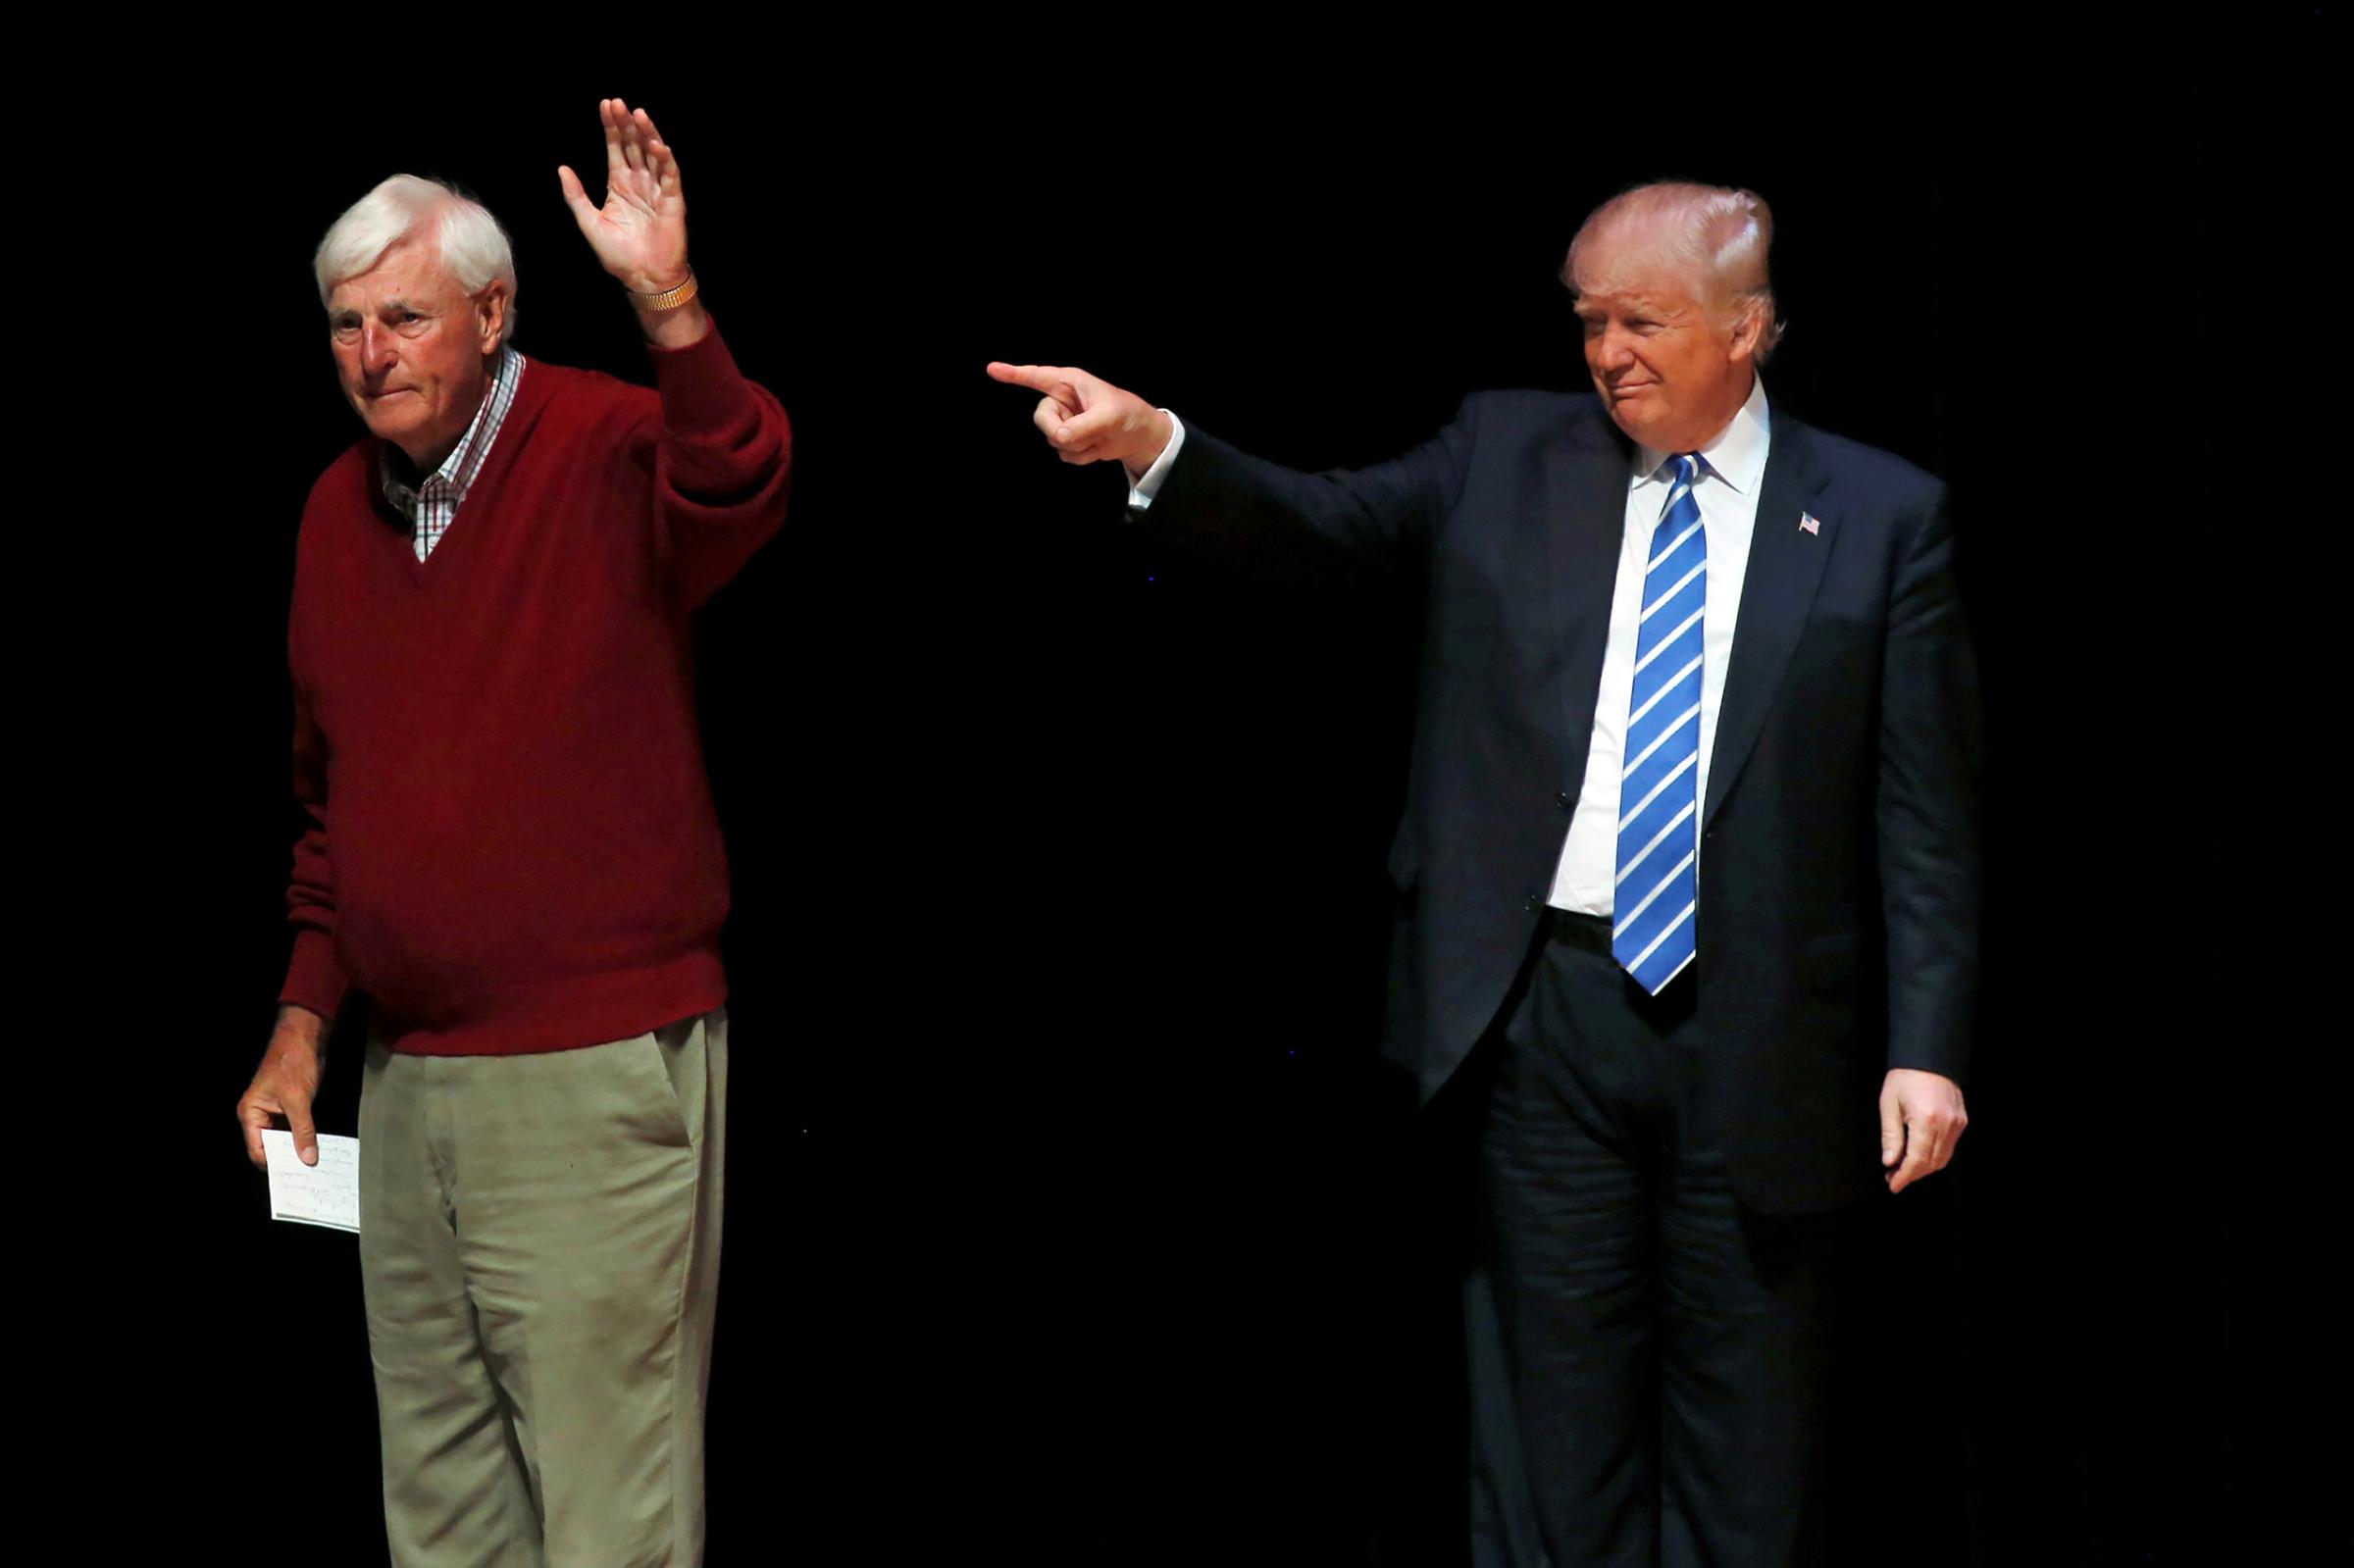 Republican presidential candidate Donald Trump is joined on stage by former Indiana University basketball coach Bob Knight at a campaign event at the Old National Events Plaza in Evansville, Ind. on April 28, 2016.